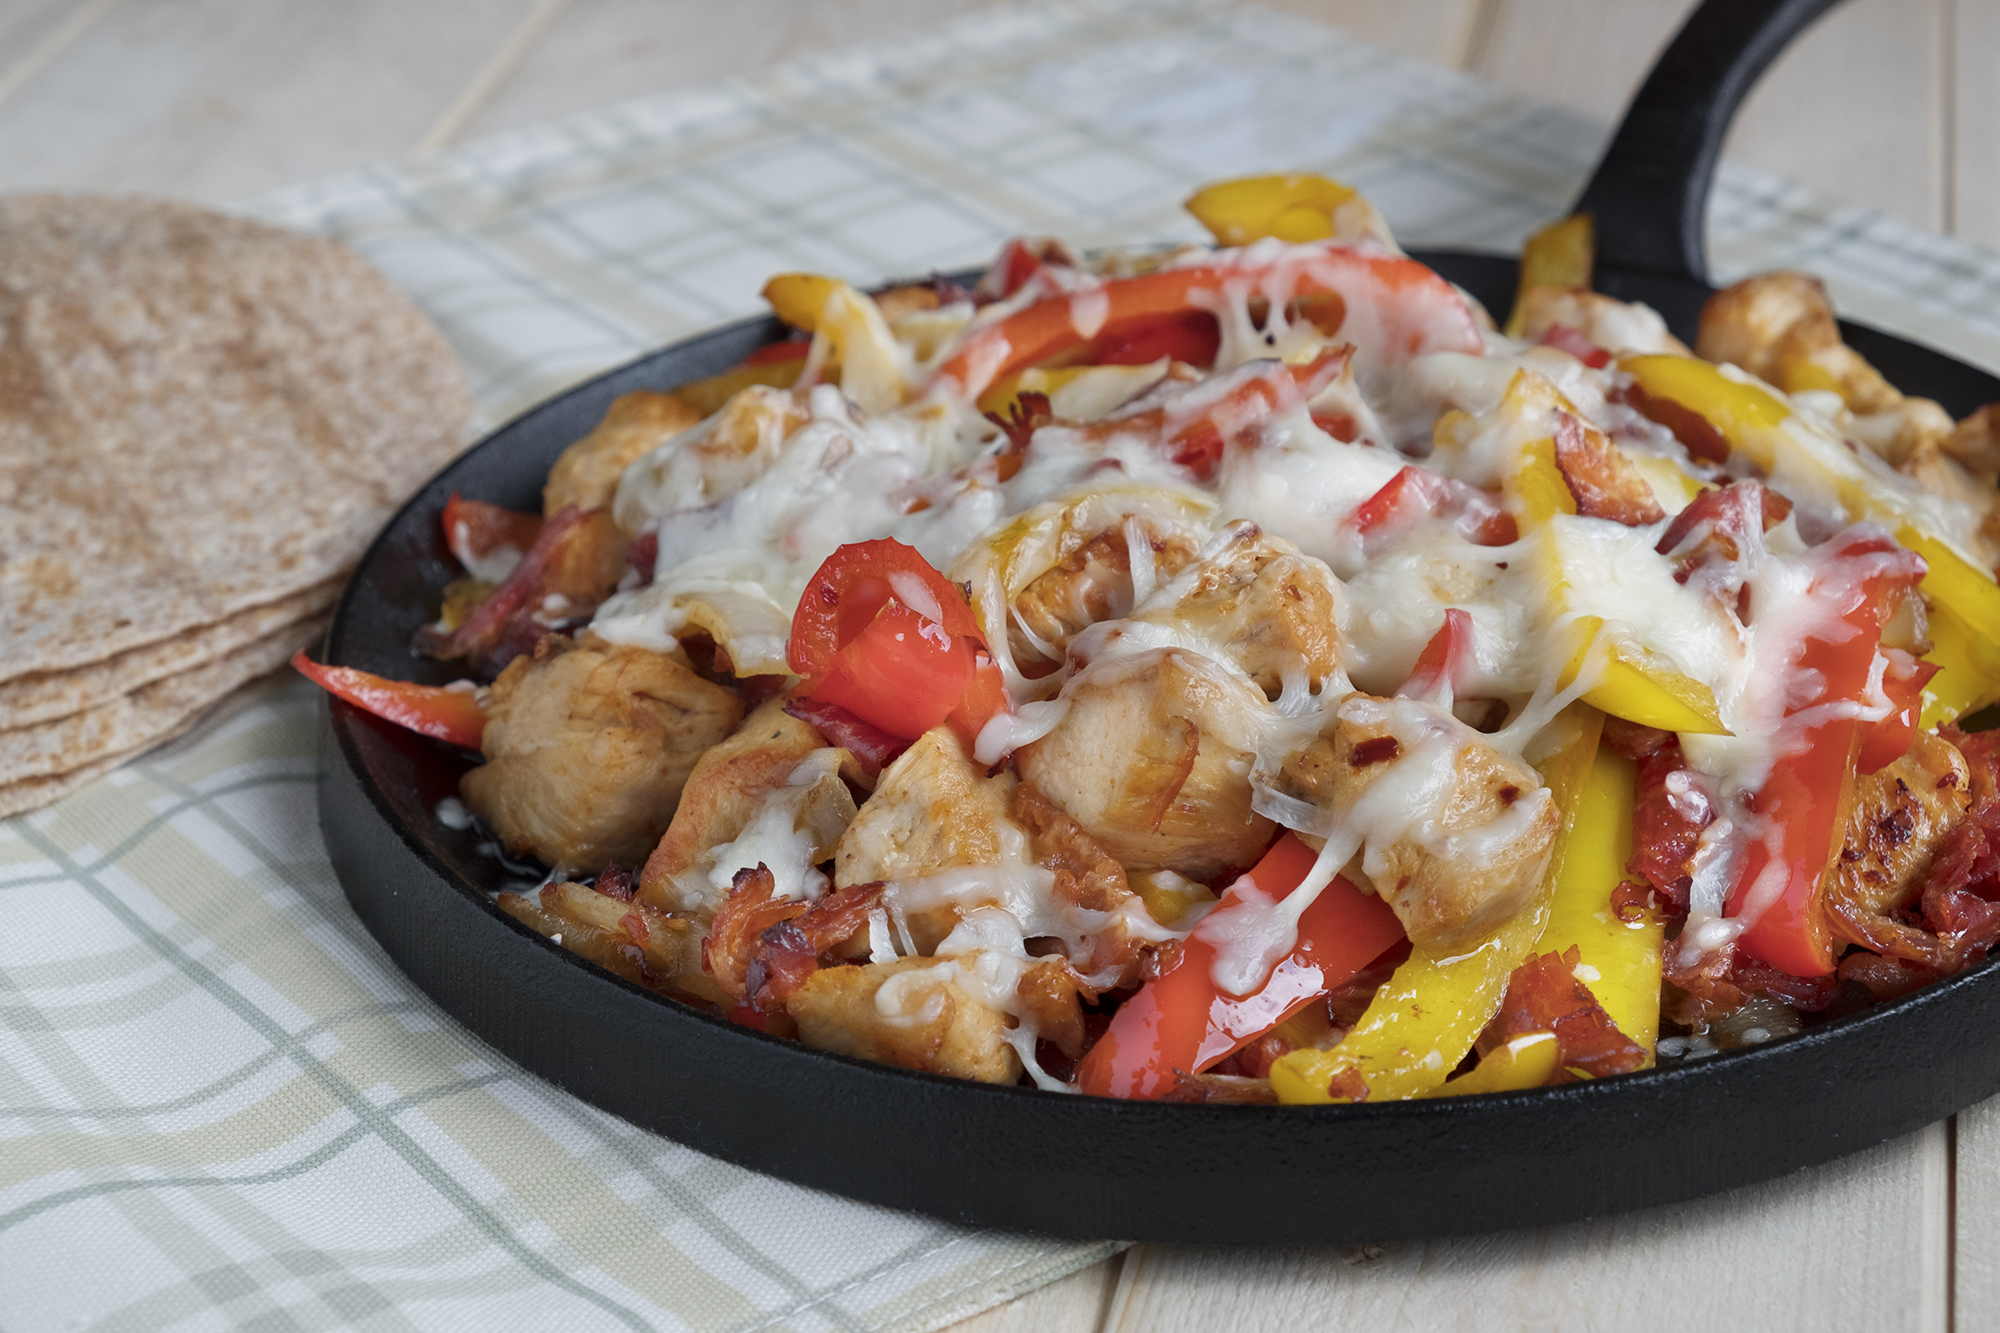 It's time to kick up your dinner a notch! This fajita is a perfect combination of flavors.